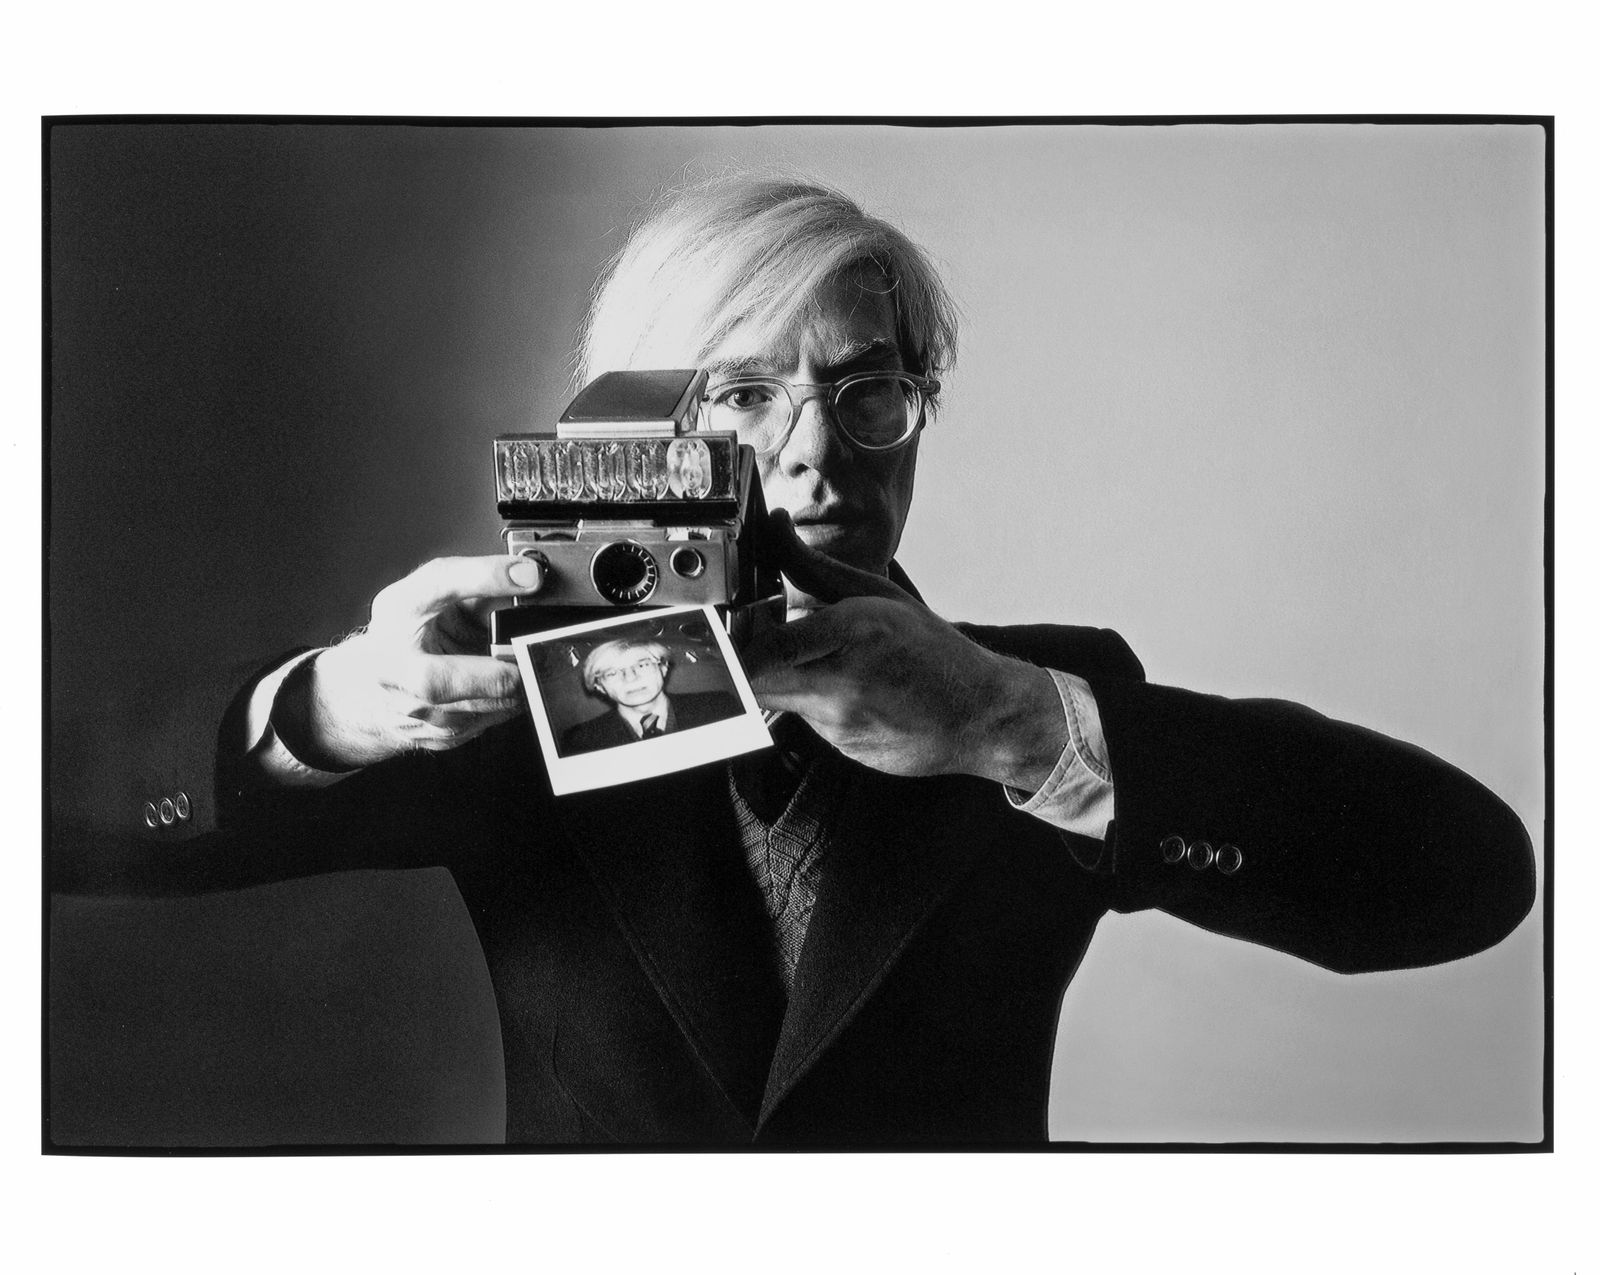 Exhibition: Andy Warhol and Photography – A Social Media